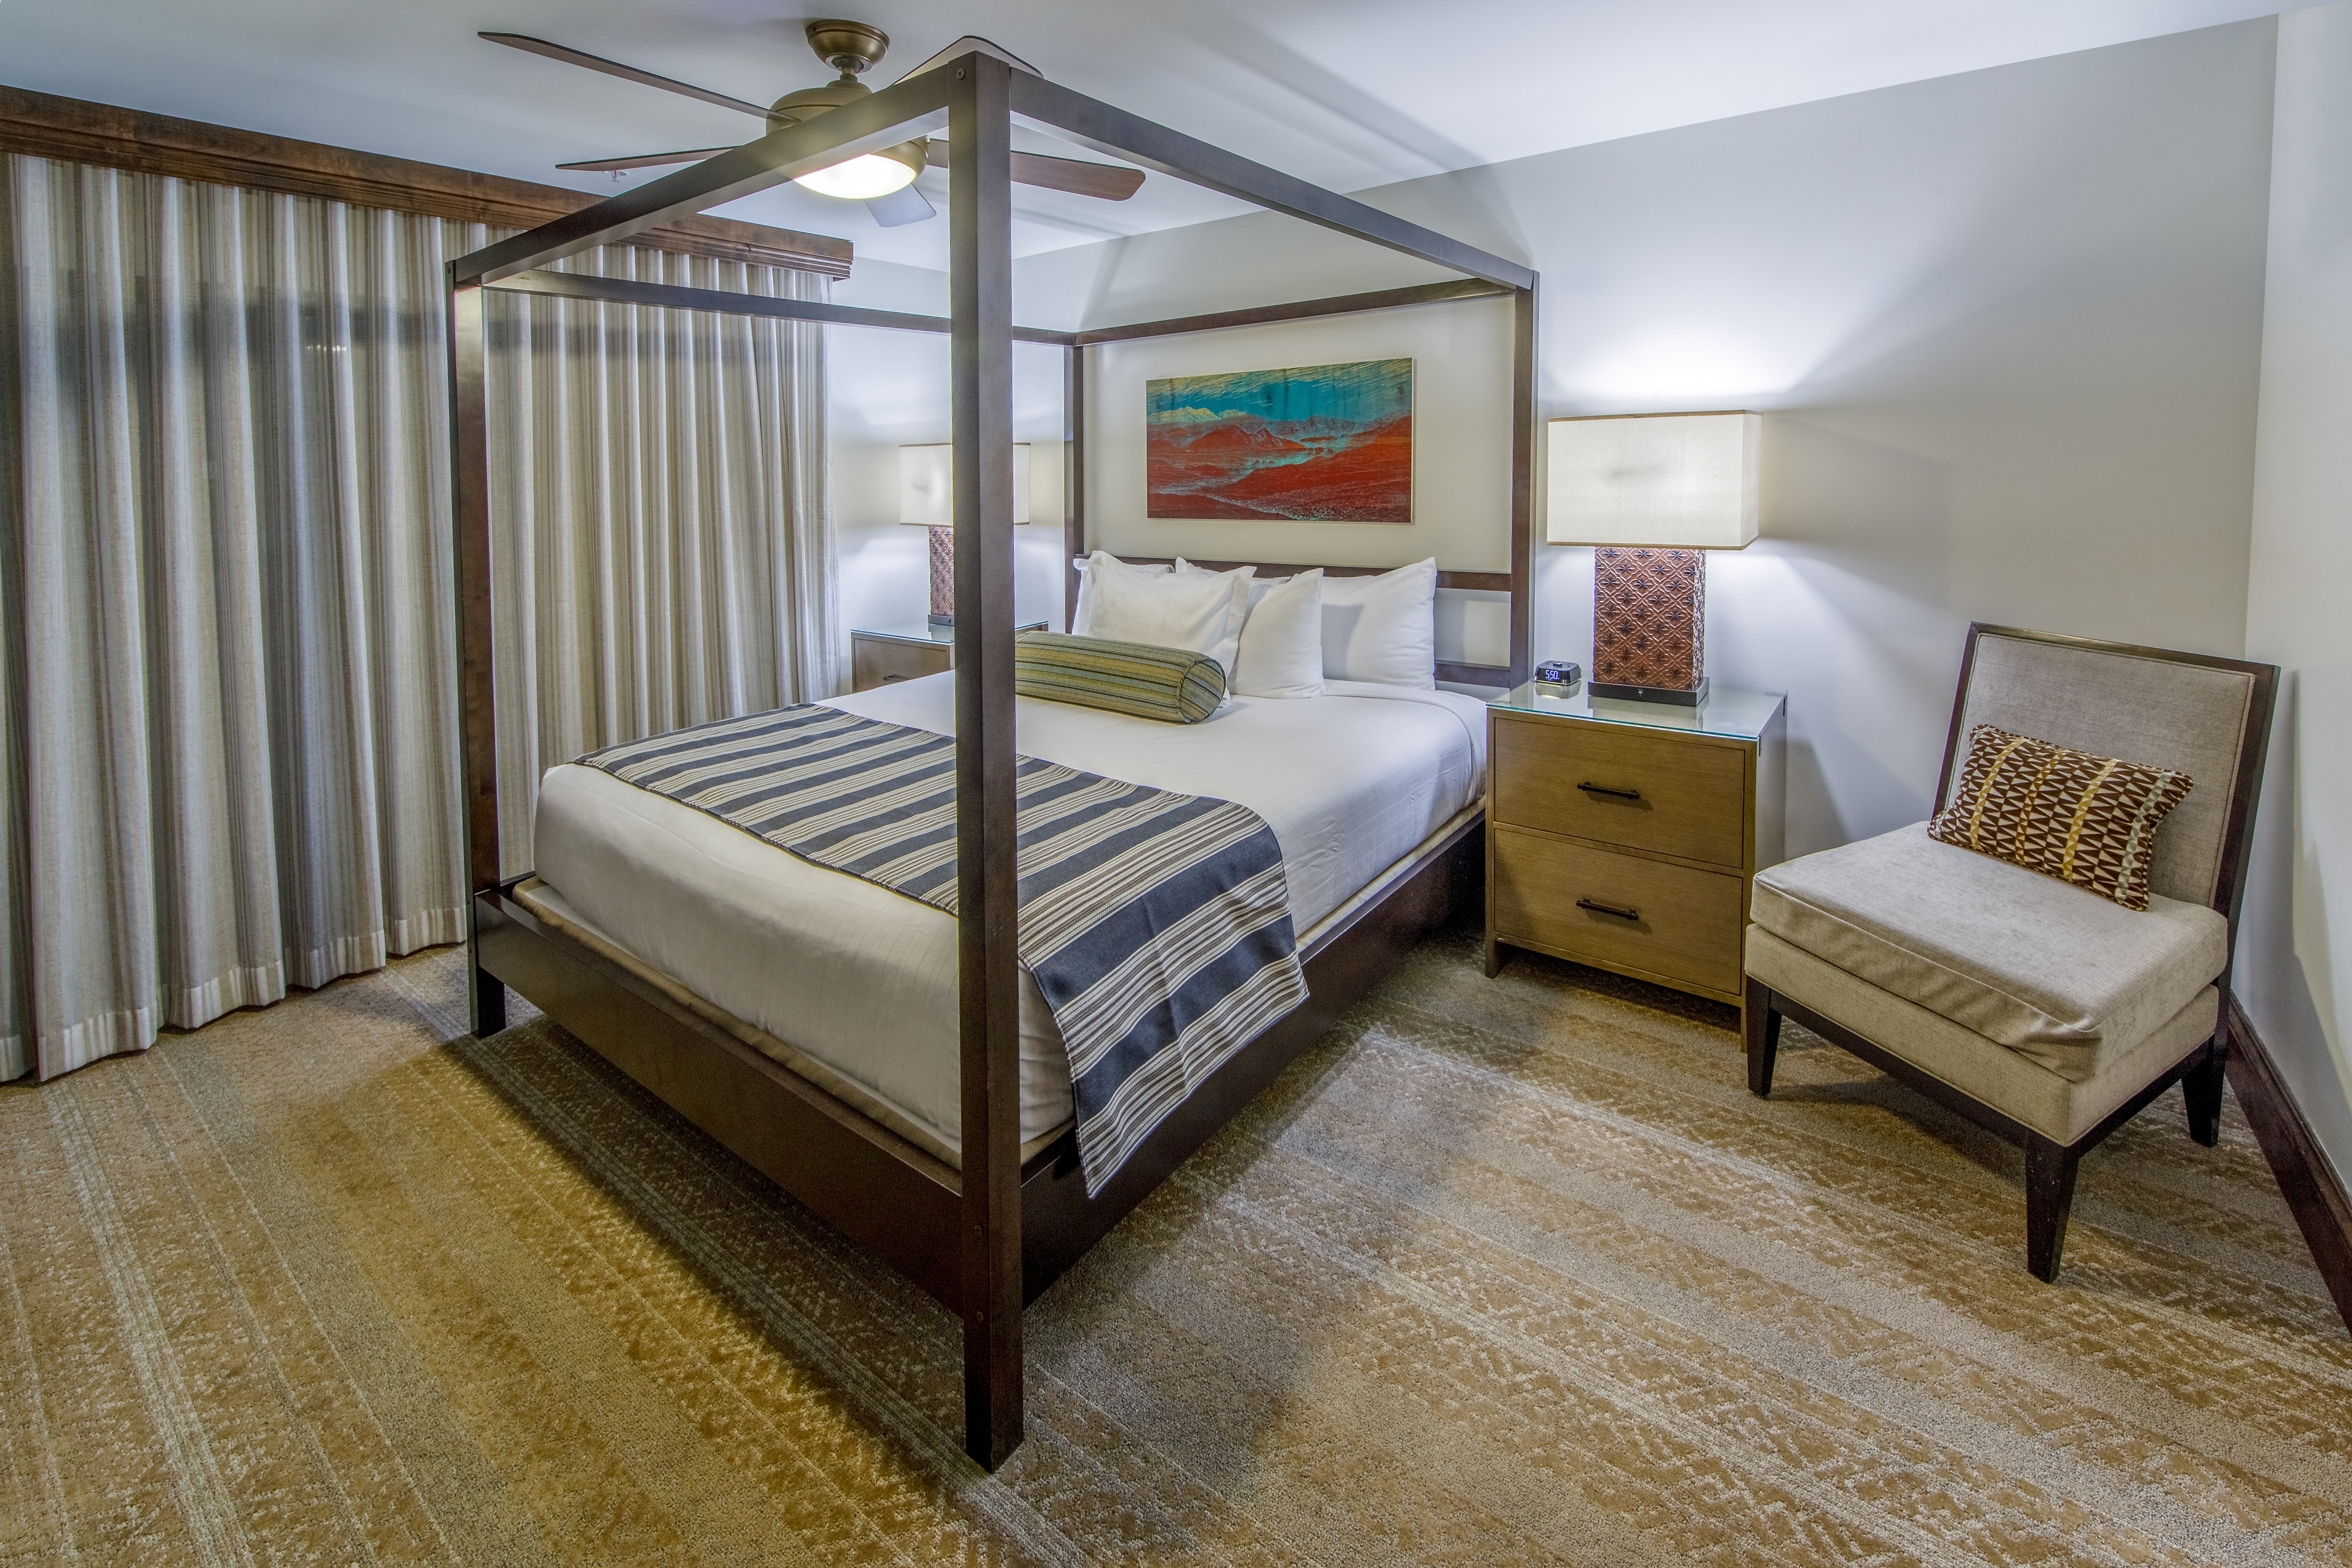 Signature collection guest bedroom with spacious accommodations